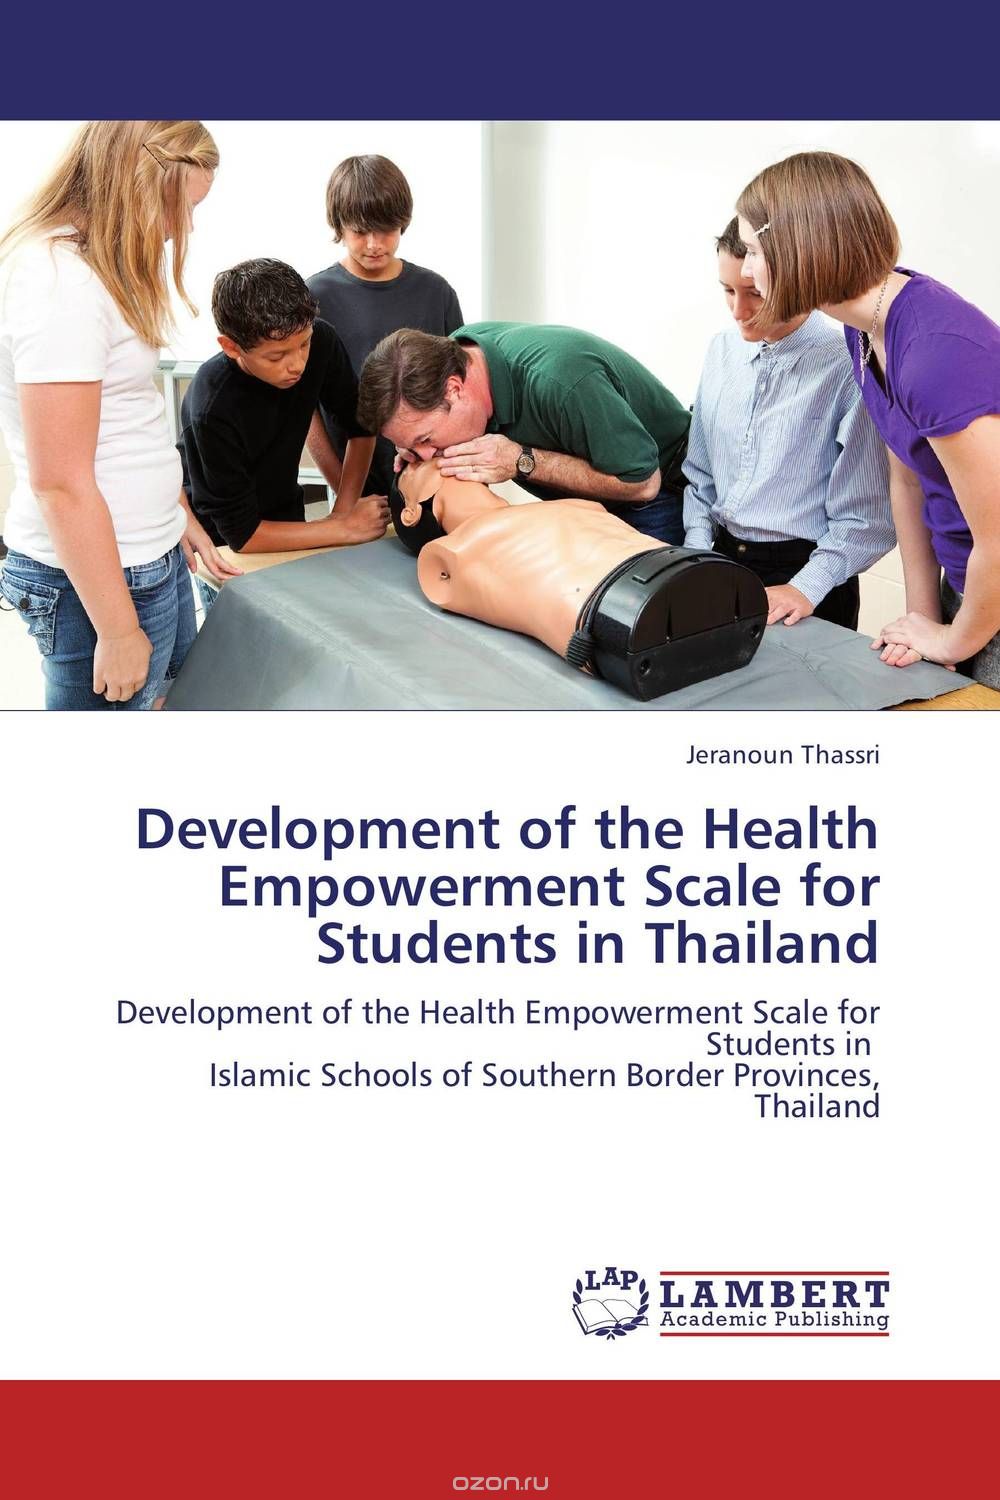 Development of the Health Empowerment Scale for Students in Thailand